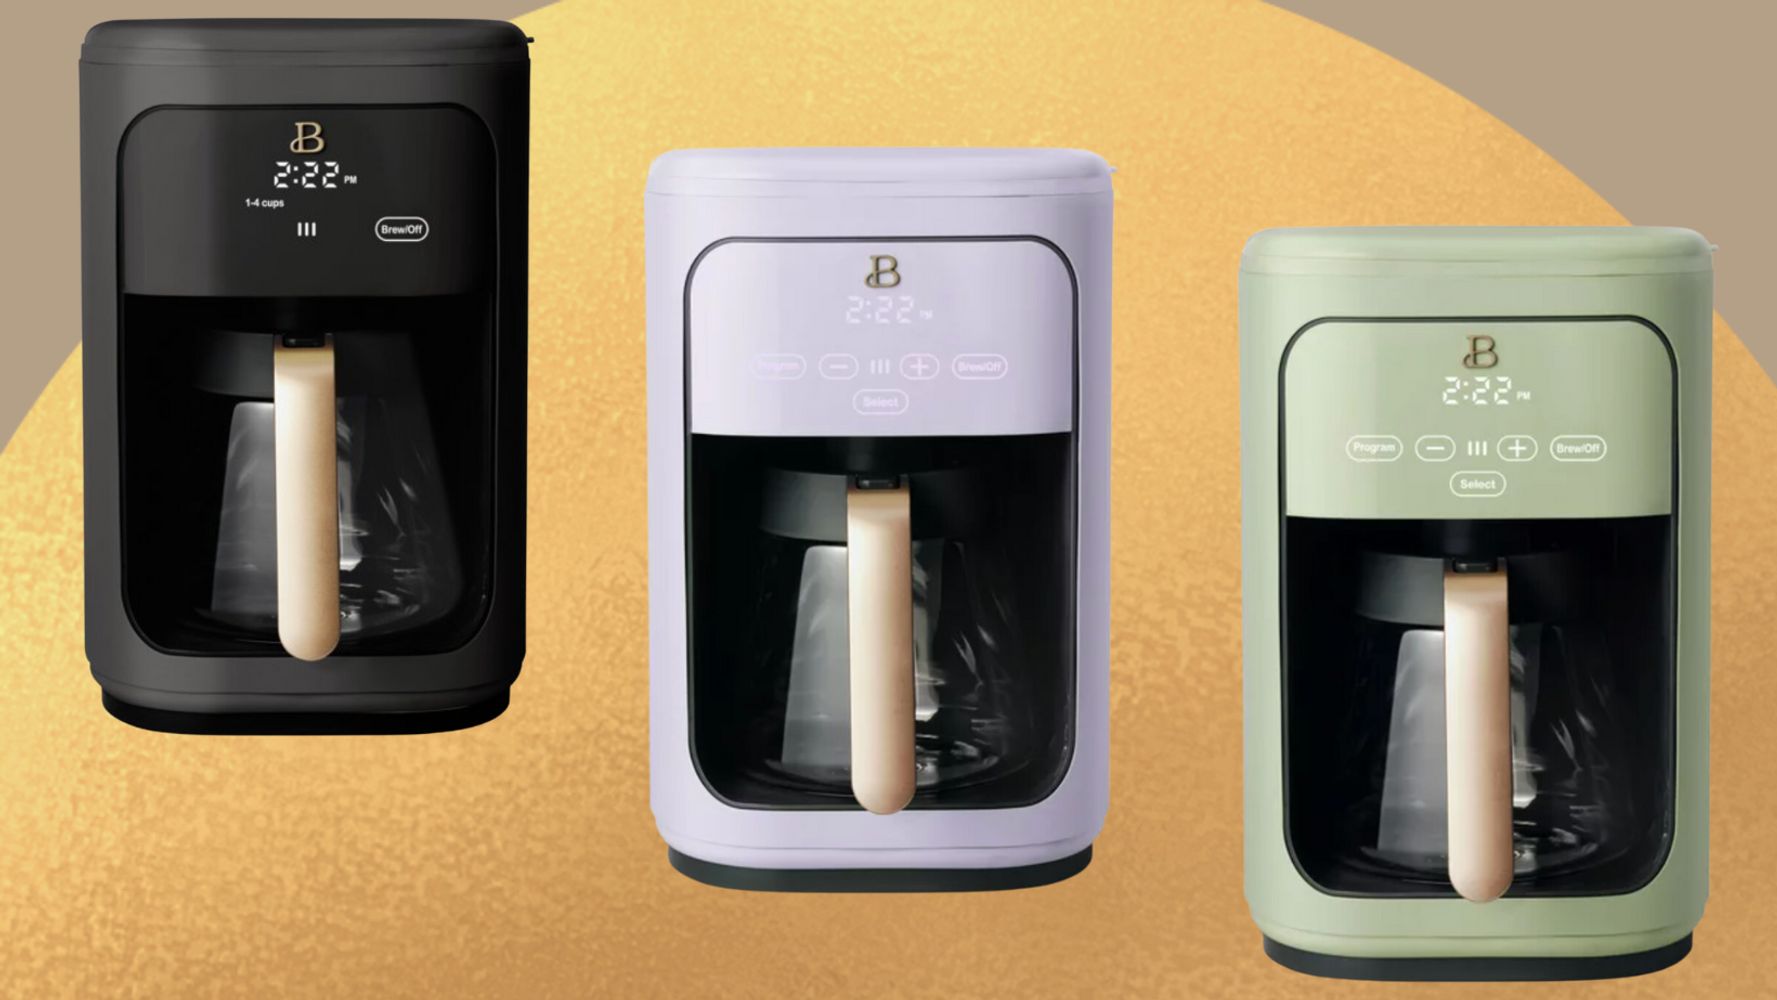 Drew Barrymore's Beautiful 14-cup coffee maker is back in stock at